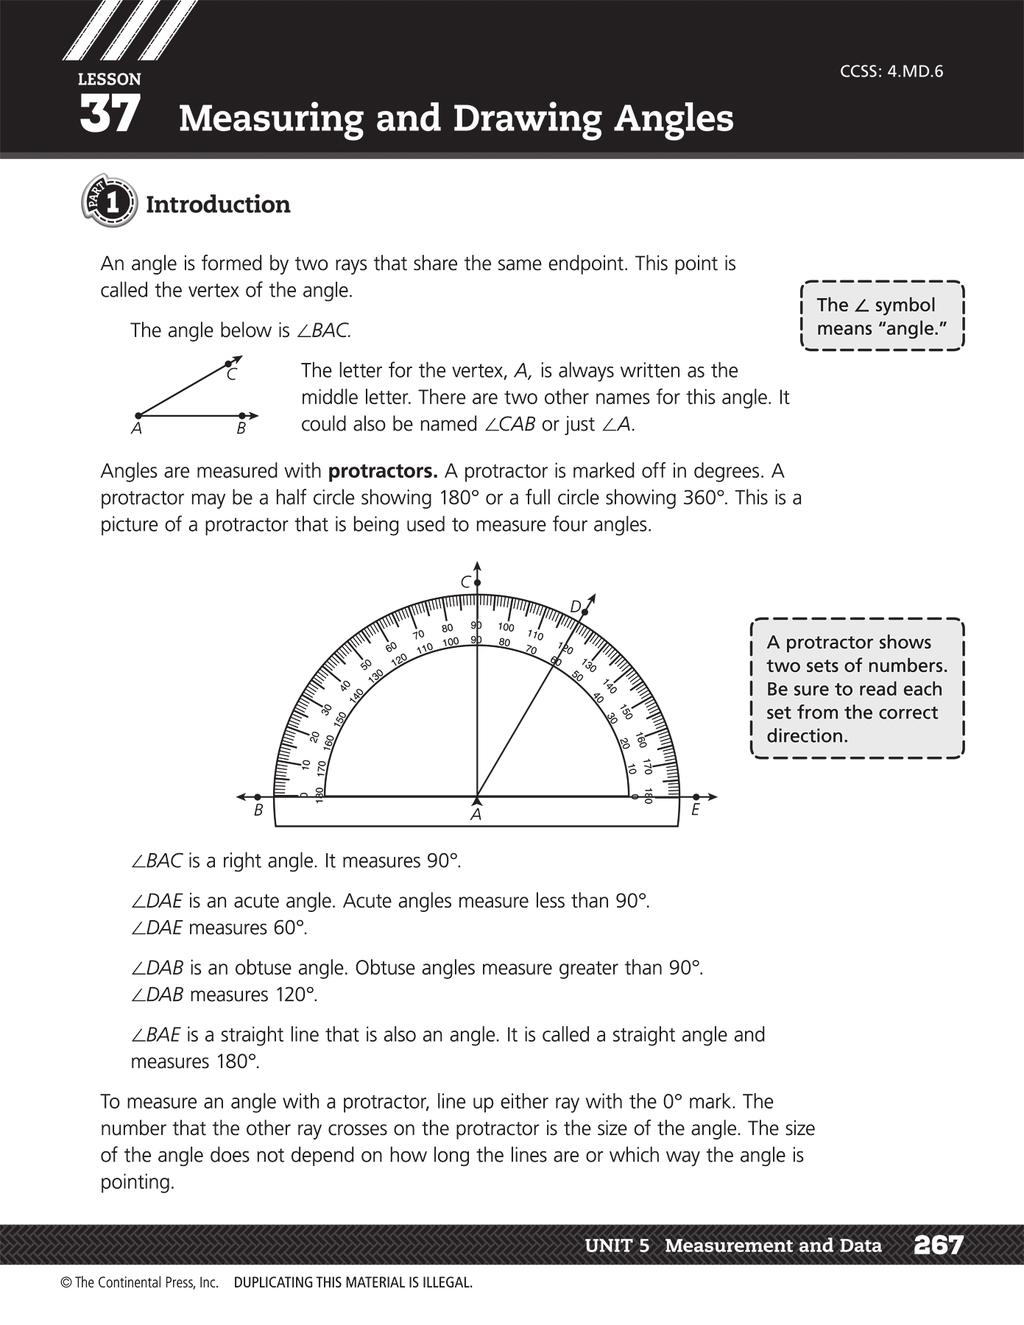 37 Measuring and Drawing Angles Pages 267 and 268 Objective To use a protractor to measure and draw angles 1 Introduction Distribute protractors to individual or pairs of students; if necessary, copy